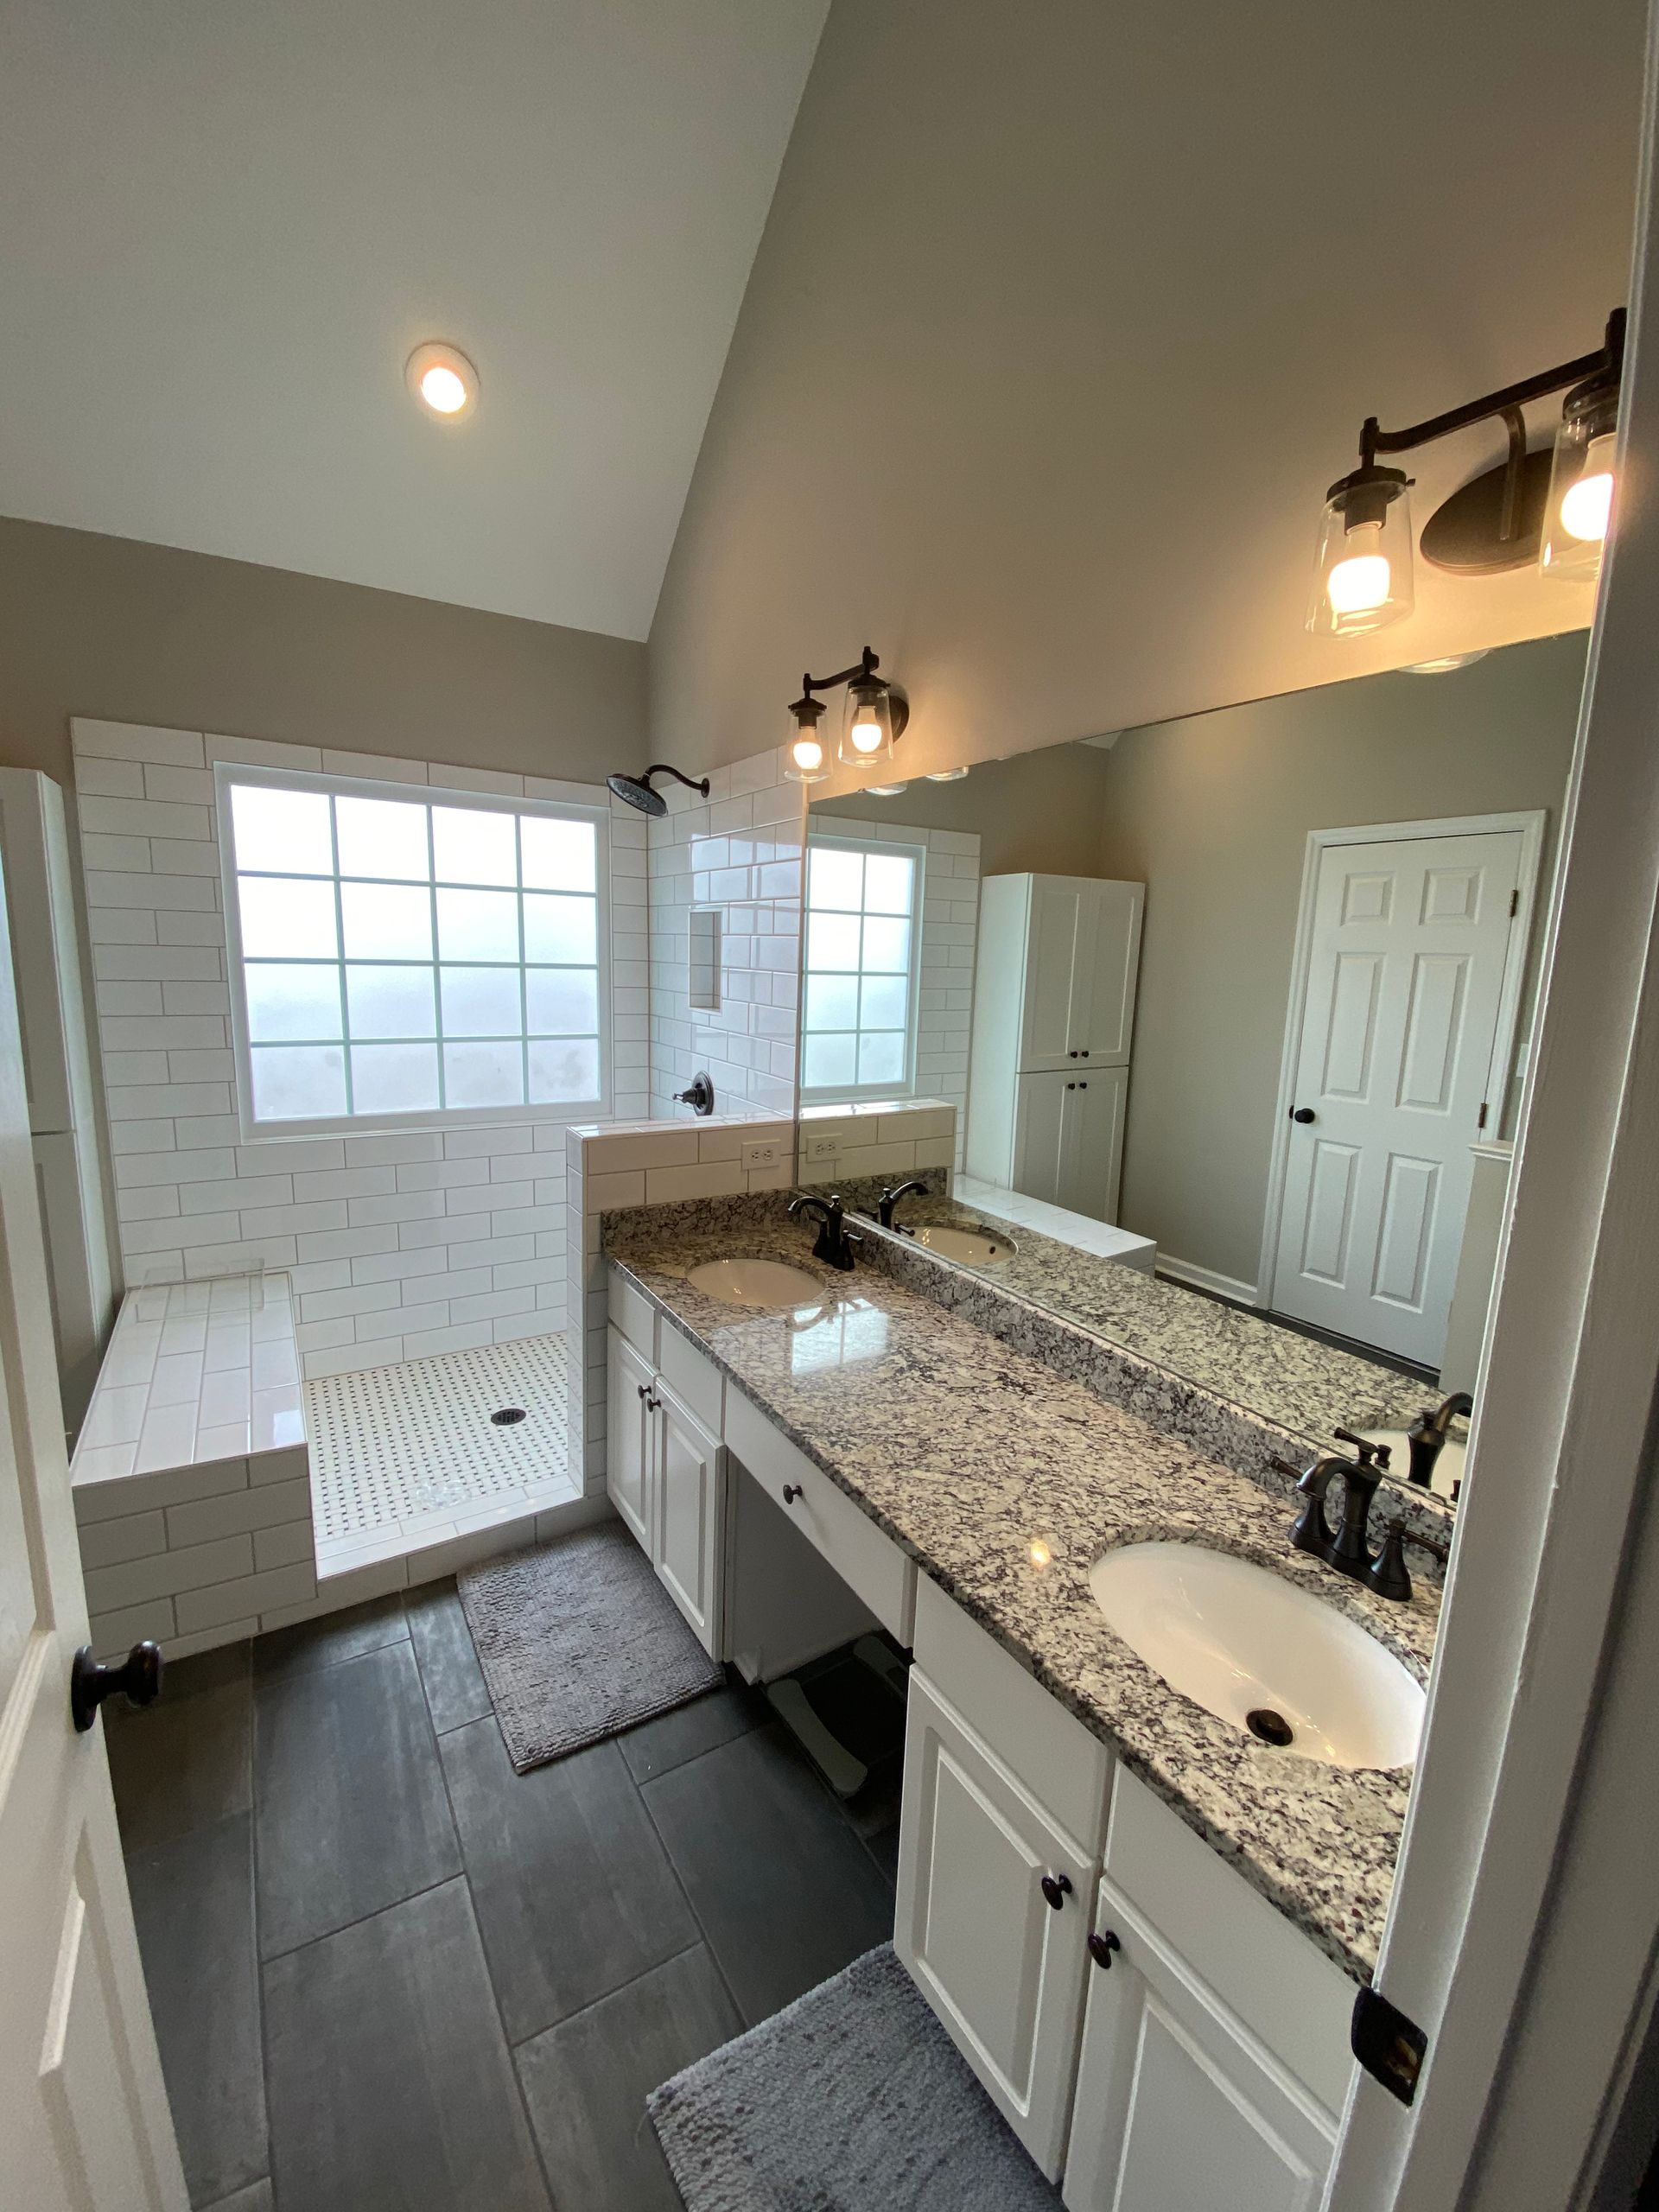 The same kitchen with the previously brown cabinets painted white and grey.